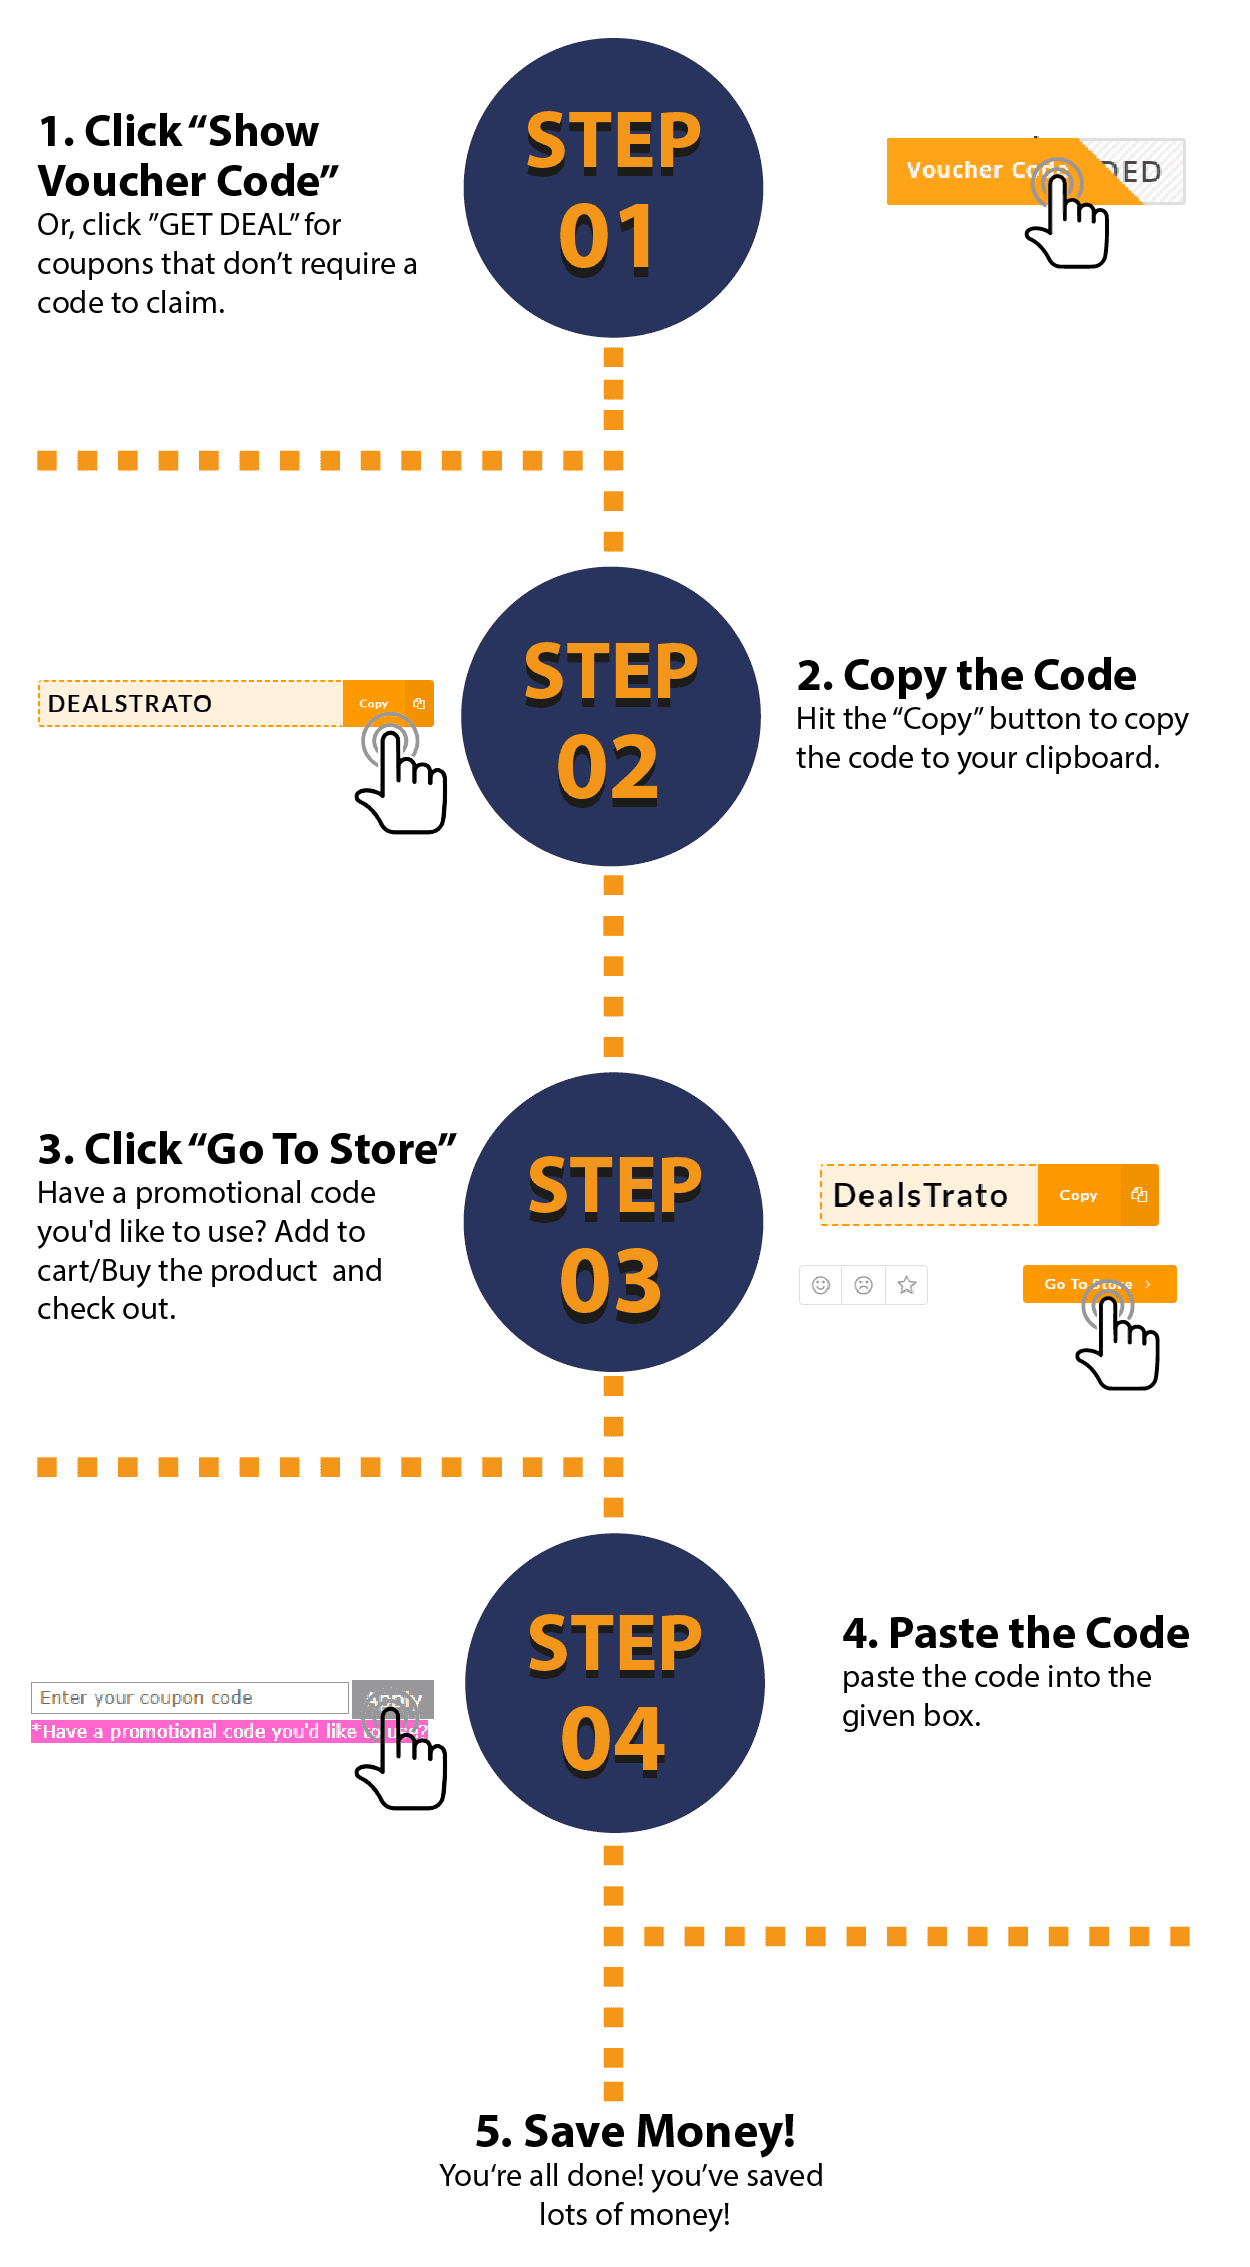 How to use our voucher codes